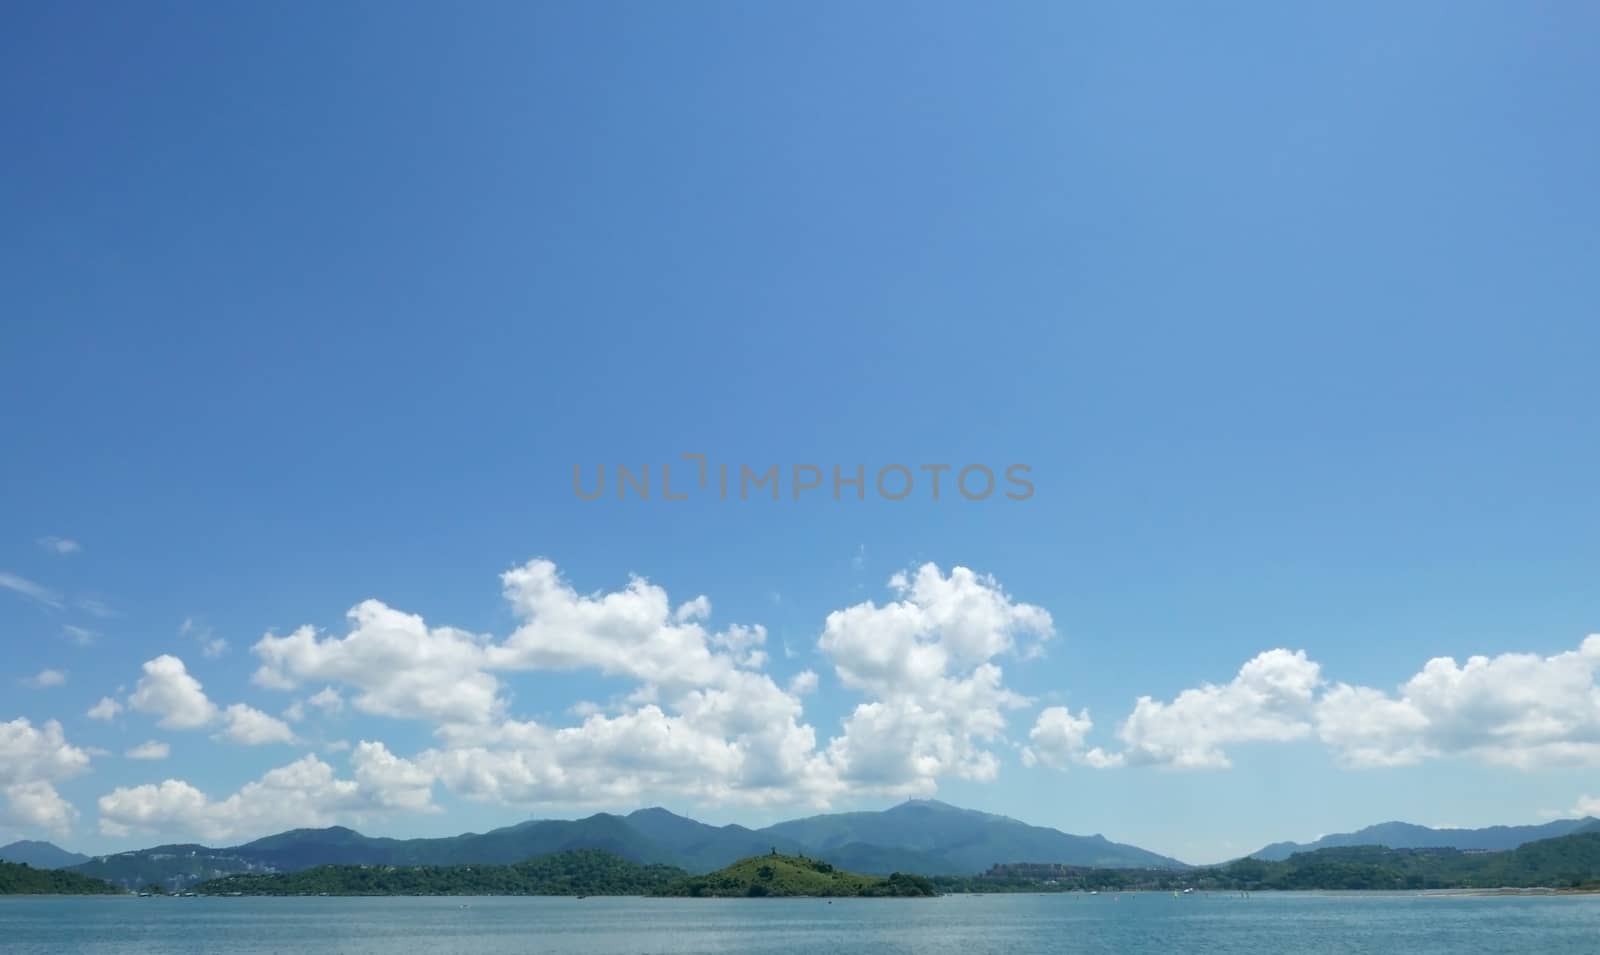 Green mountain, lake, blue sky and the white cloud